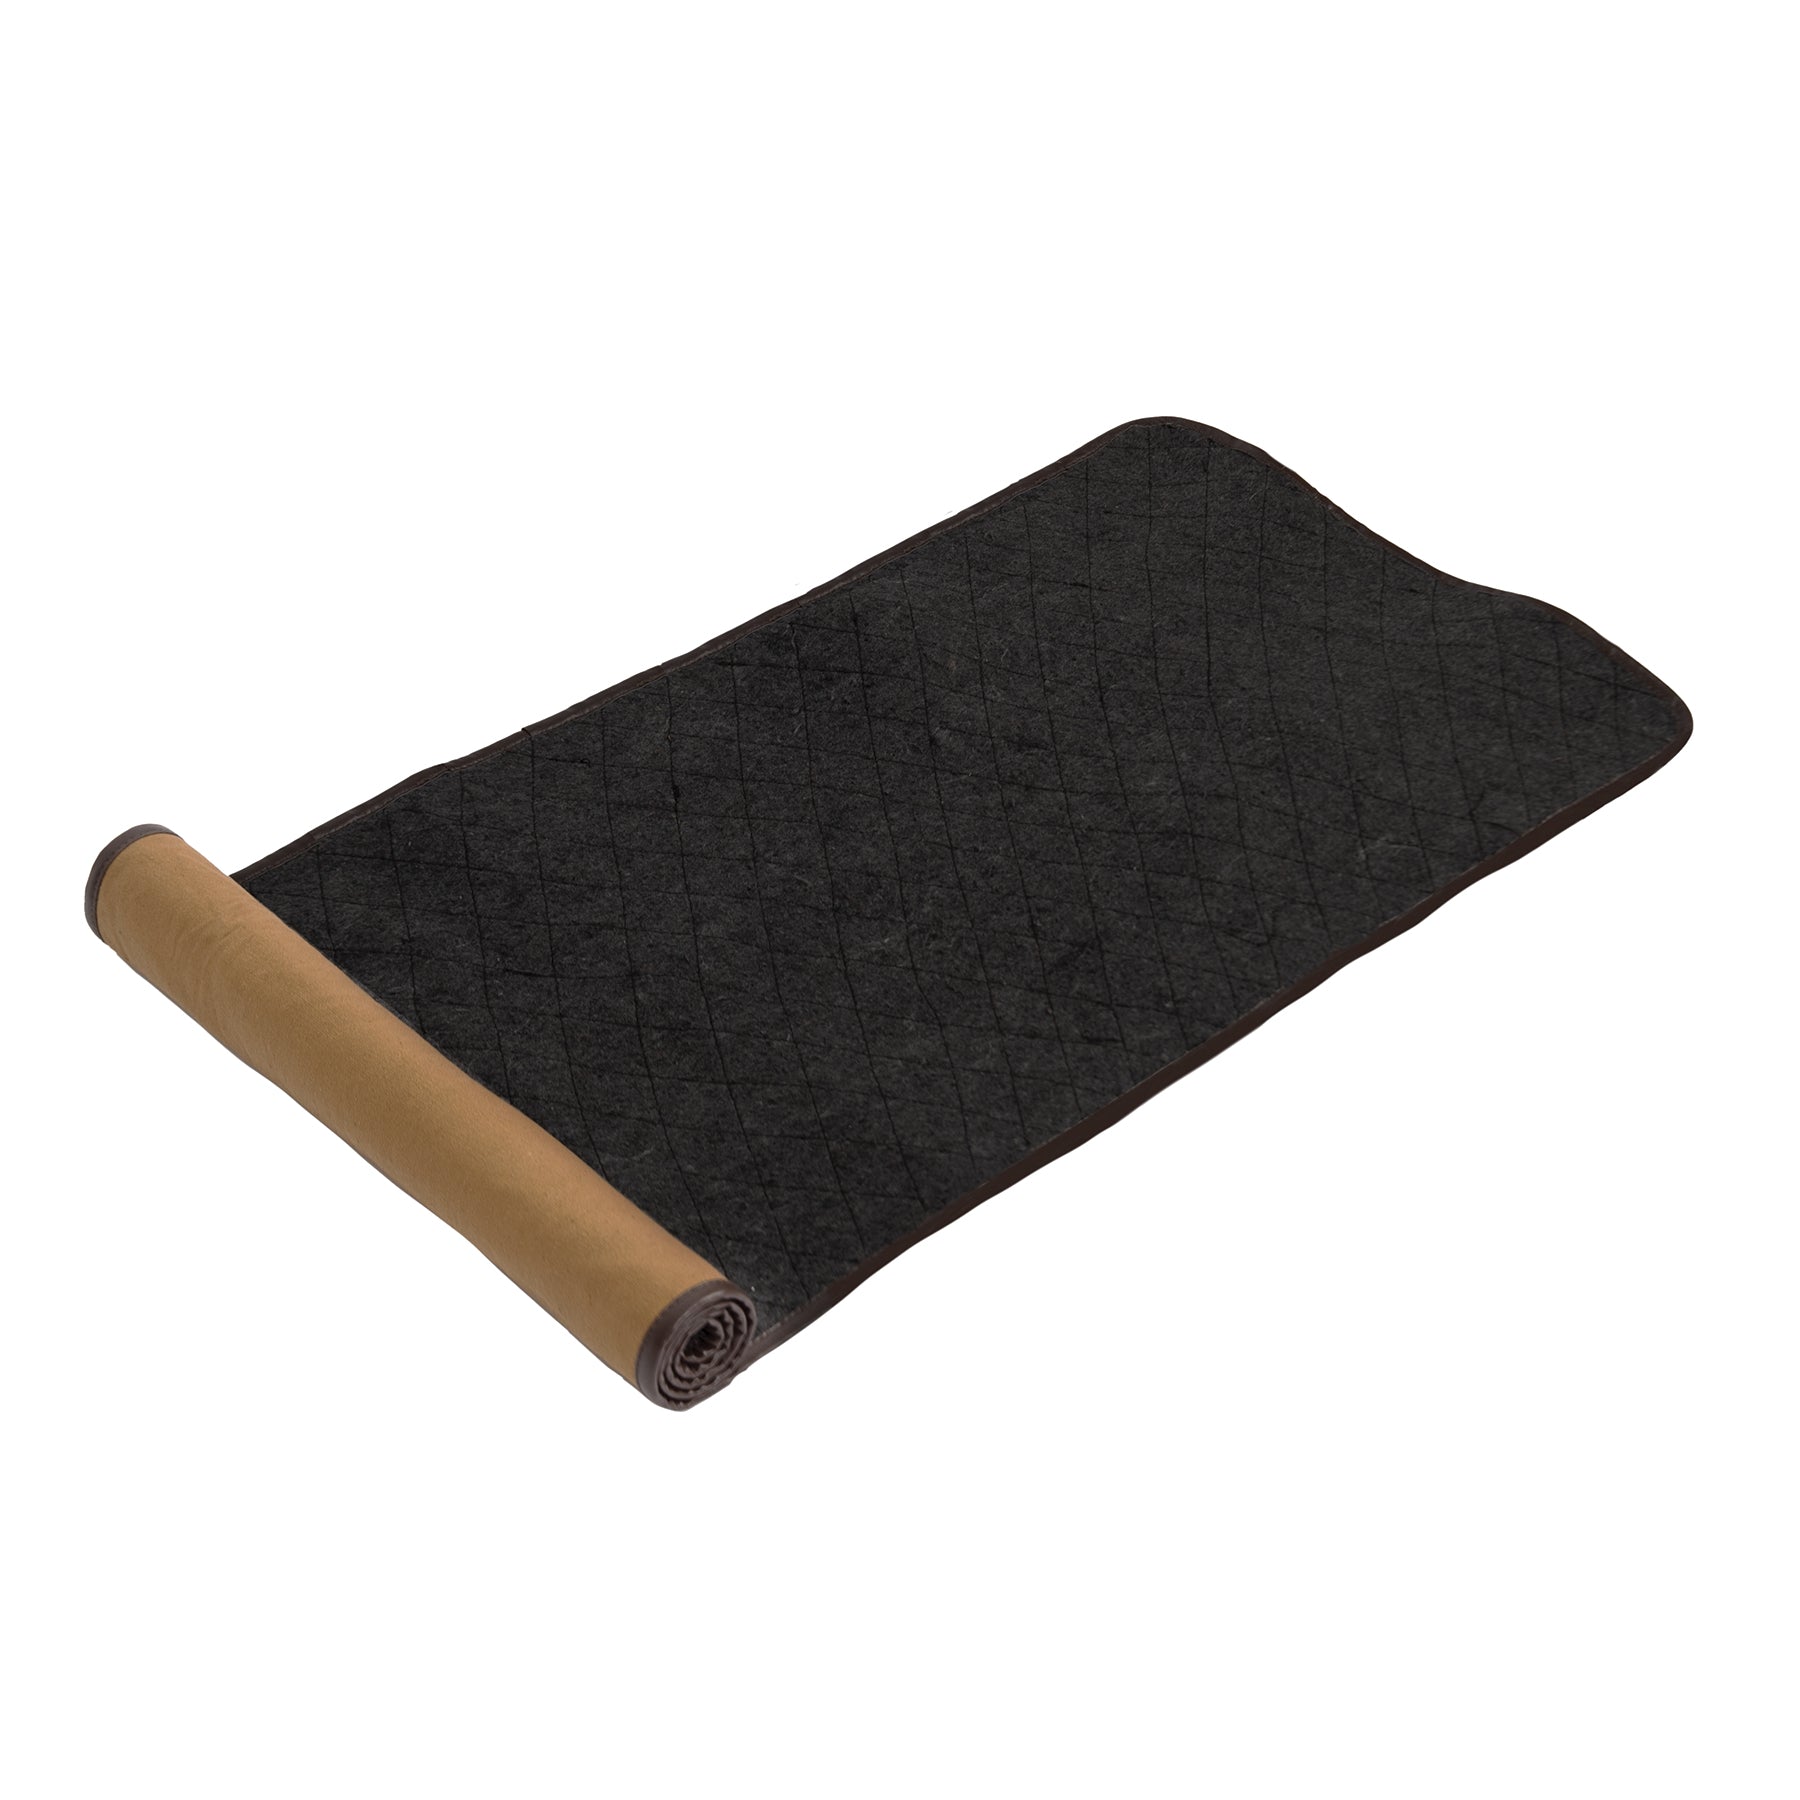 Rothco’s Canvas Gun Cleaning Mat makes it easy to protect your work surface from spills and scratches while maintaining your guns. Gun Cleaning Mat Provides Ample Surface Area For Cleaning Most Rifles (Felt Cleaning Surface Measures 50 Inches X 16.5 Inches) www.defenceqstore.com.au